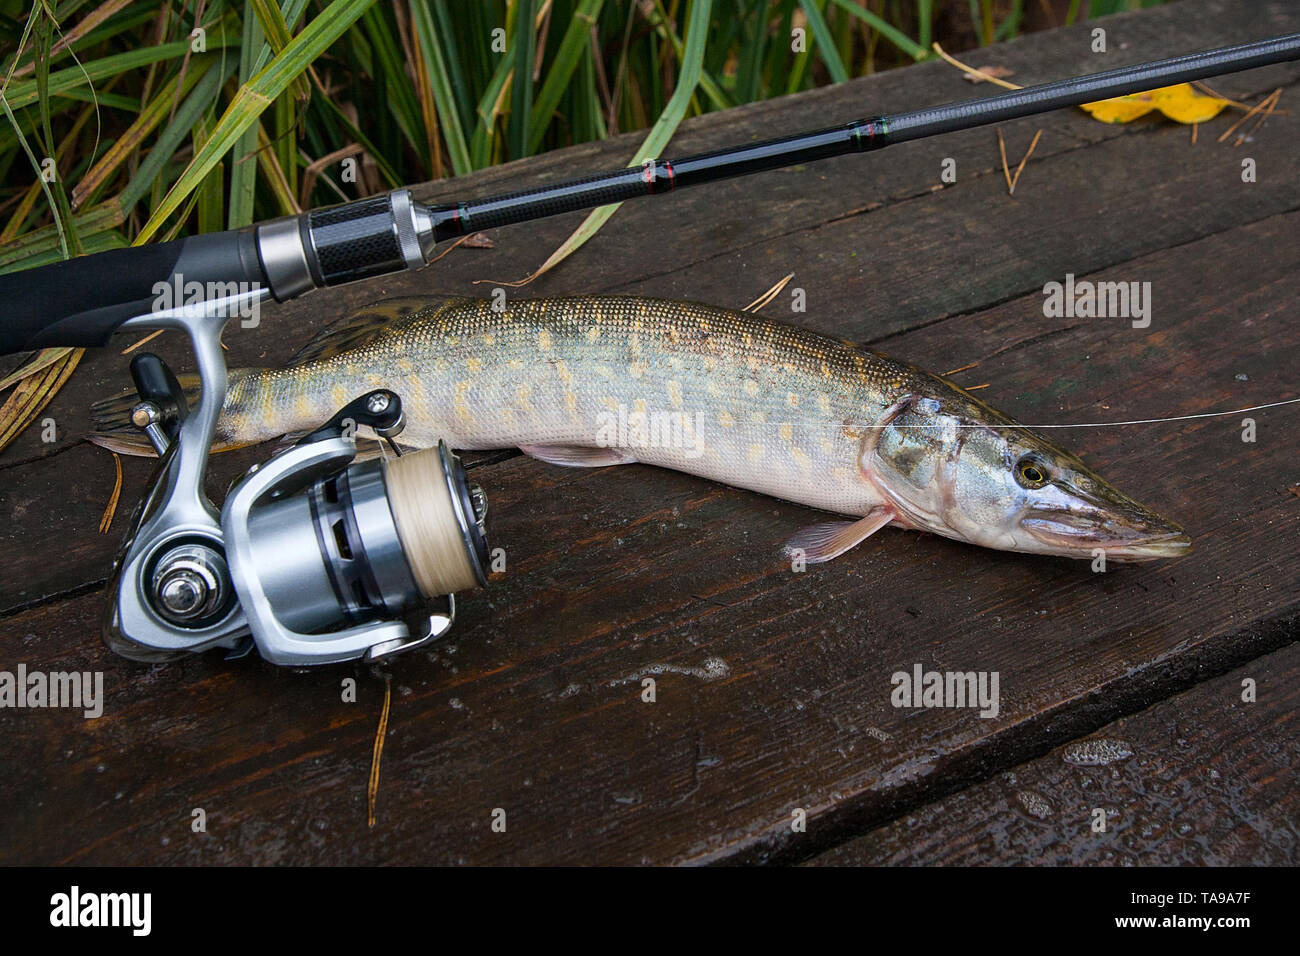 https://c8.alamy.com/comp/TA9A7F/freshwater-northern-pike-fish-know-as-esox-lucius-and-fishing-rod-with-reel-lying-on-vintage-wooden-background-at-autumn-time-fishing-concept-good-c-TA9A7F.jpg